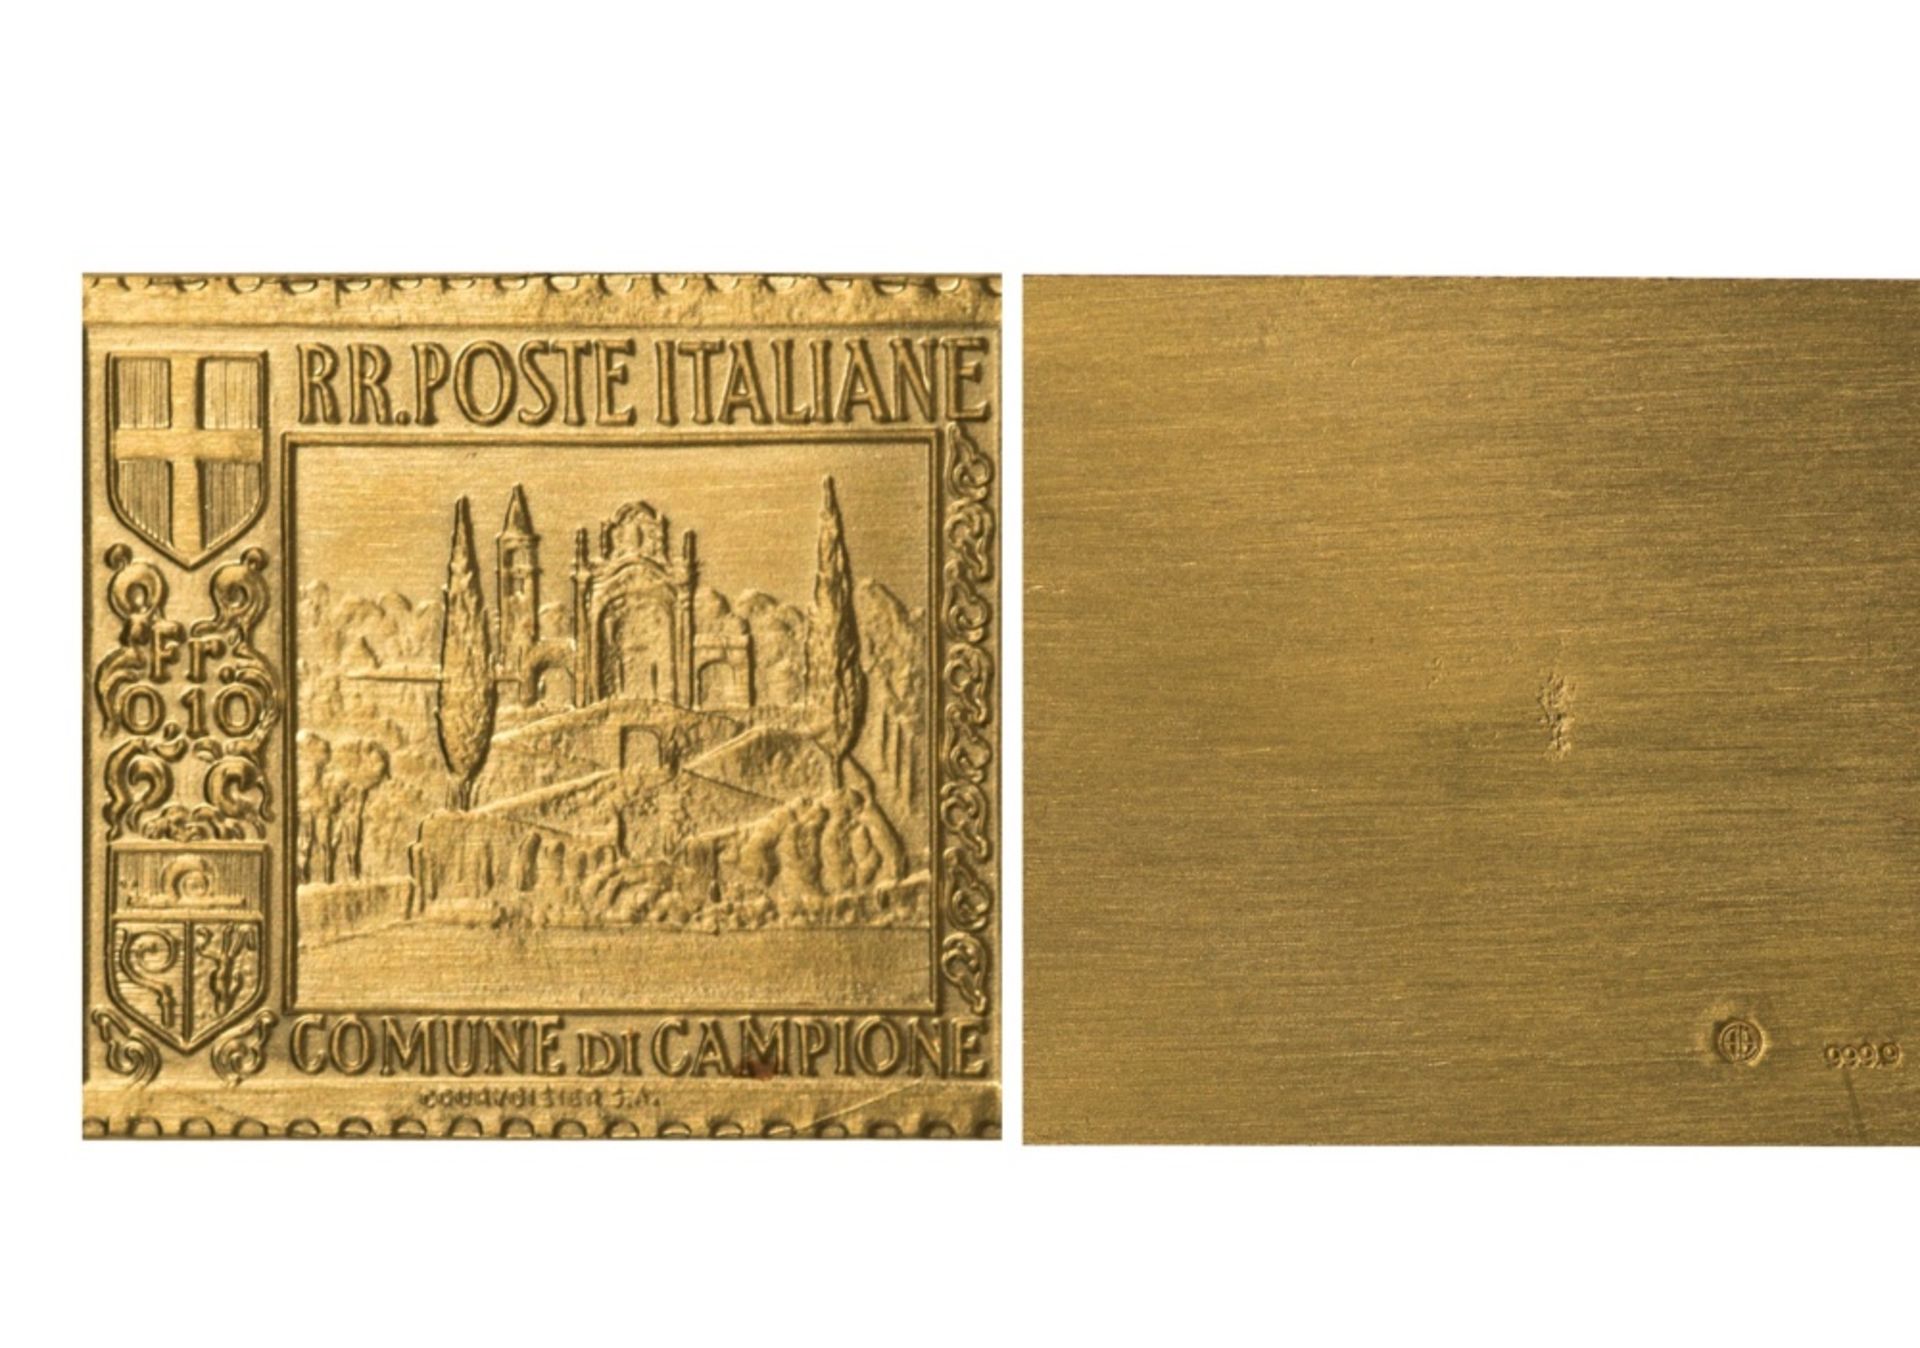 Italy Courvoisier S.A., metallic stamp, 0,10 Fr., 13.22g, 27mm x 33mm, in gold, R.R. POSTE